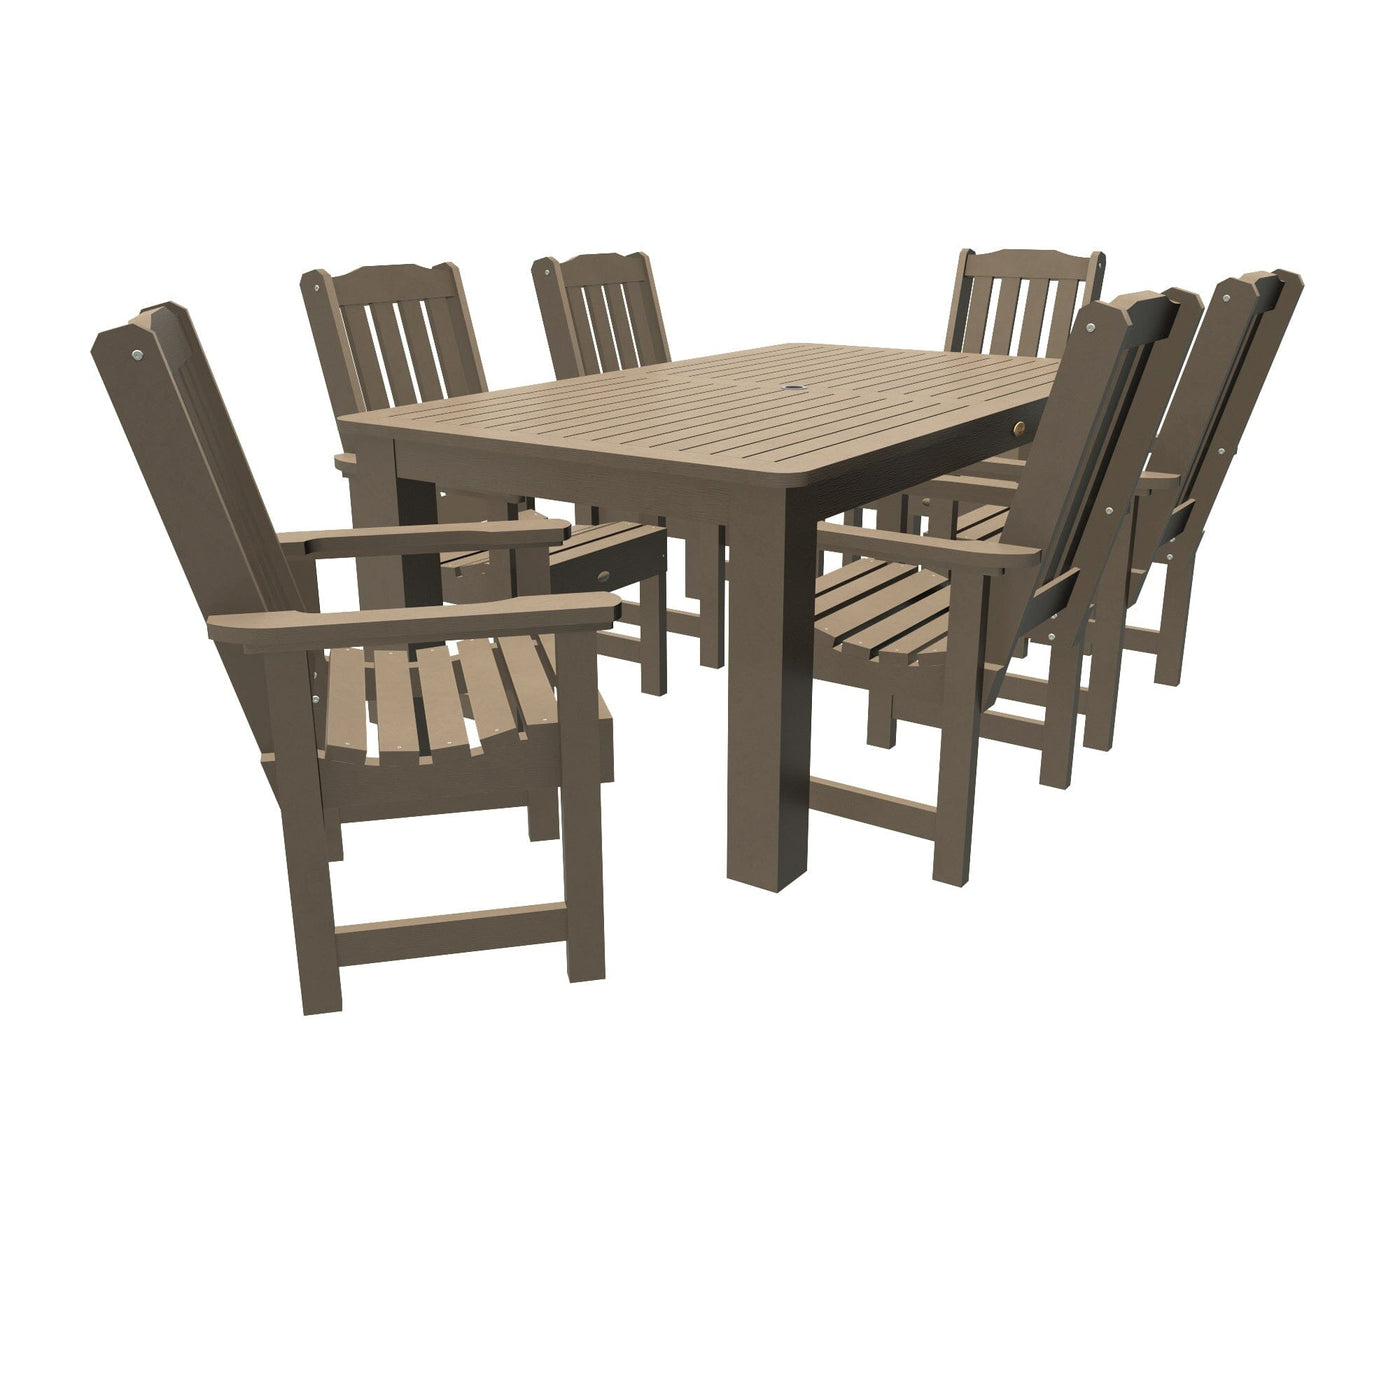 Lehigh 7pc Rectangular Outdoor Dining Set 42in x 72in - Dining Height Dining Highwood USA Woodland Brown 